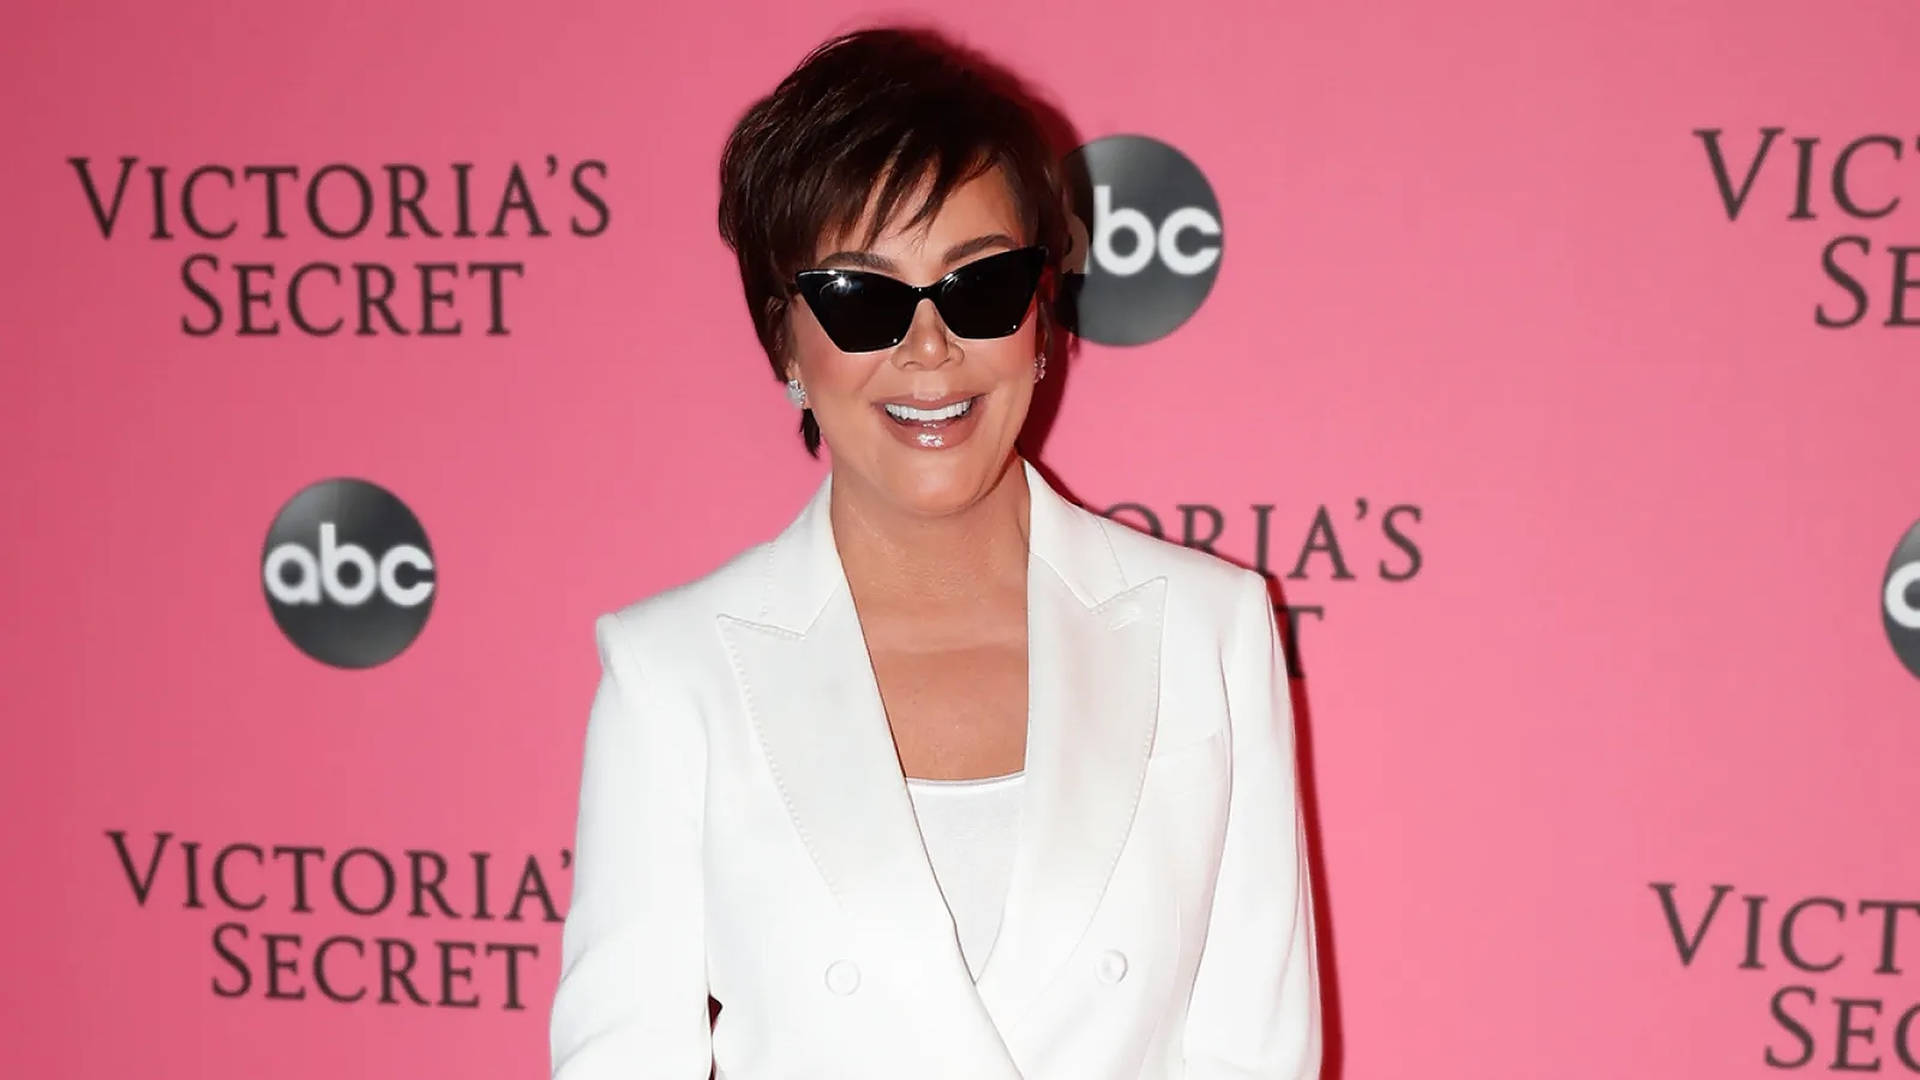 Kris Jenner At The Event